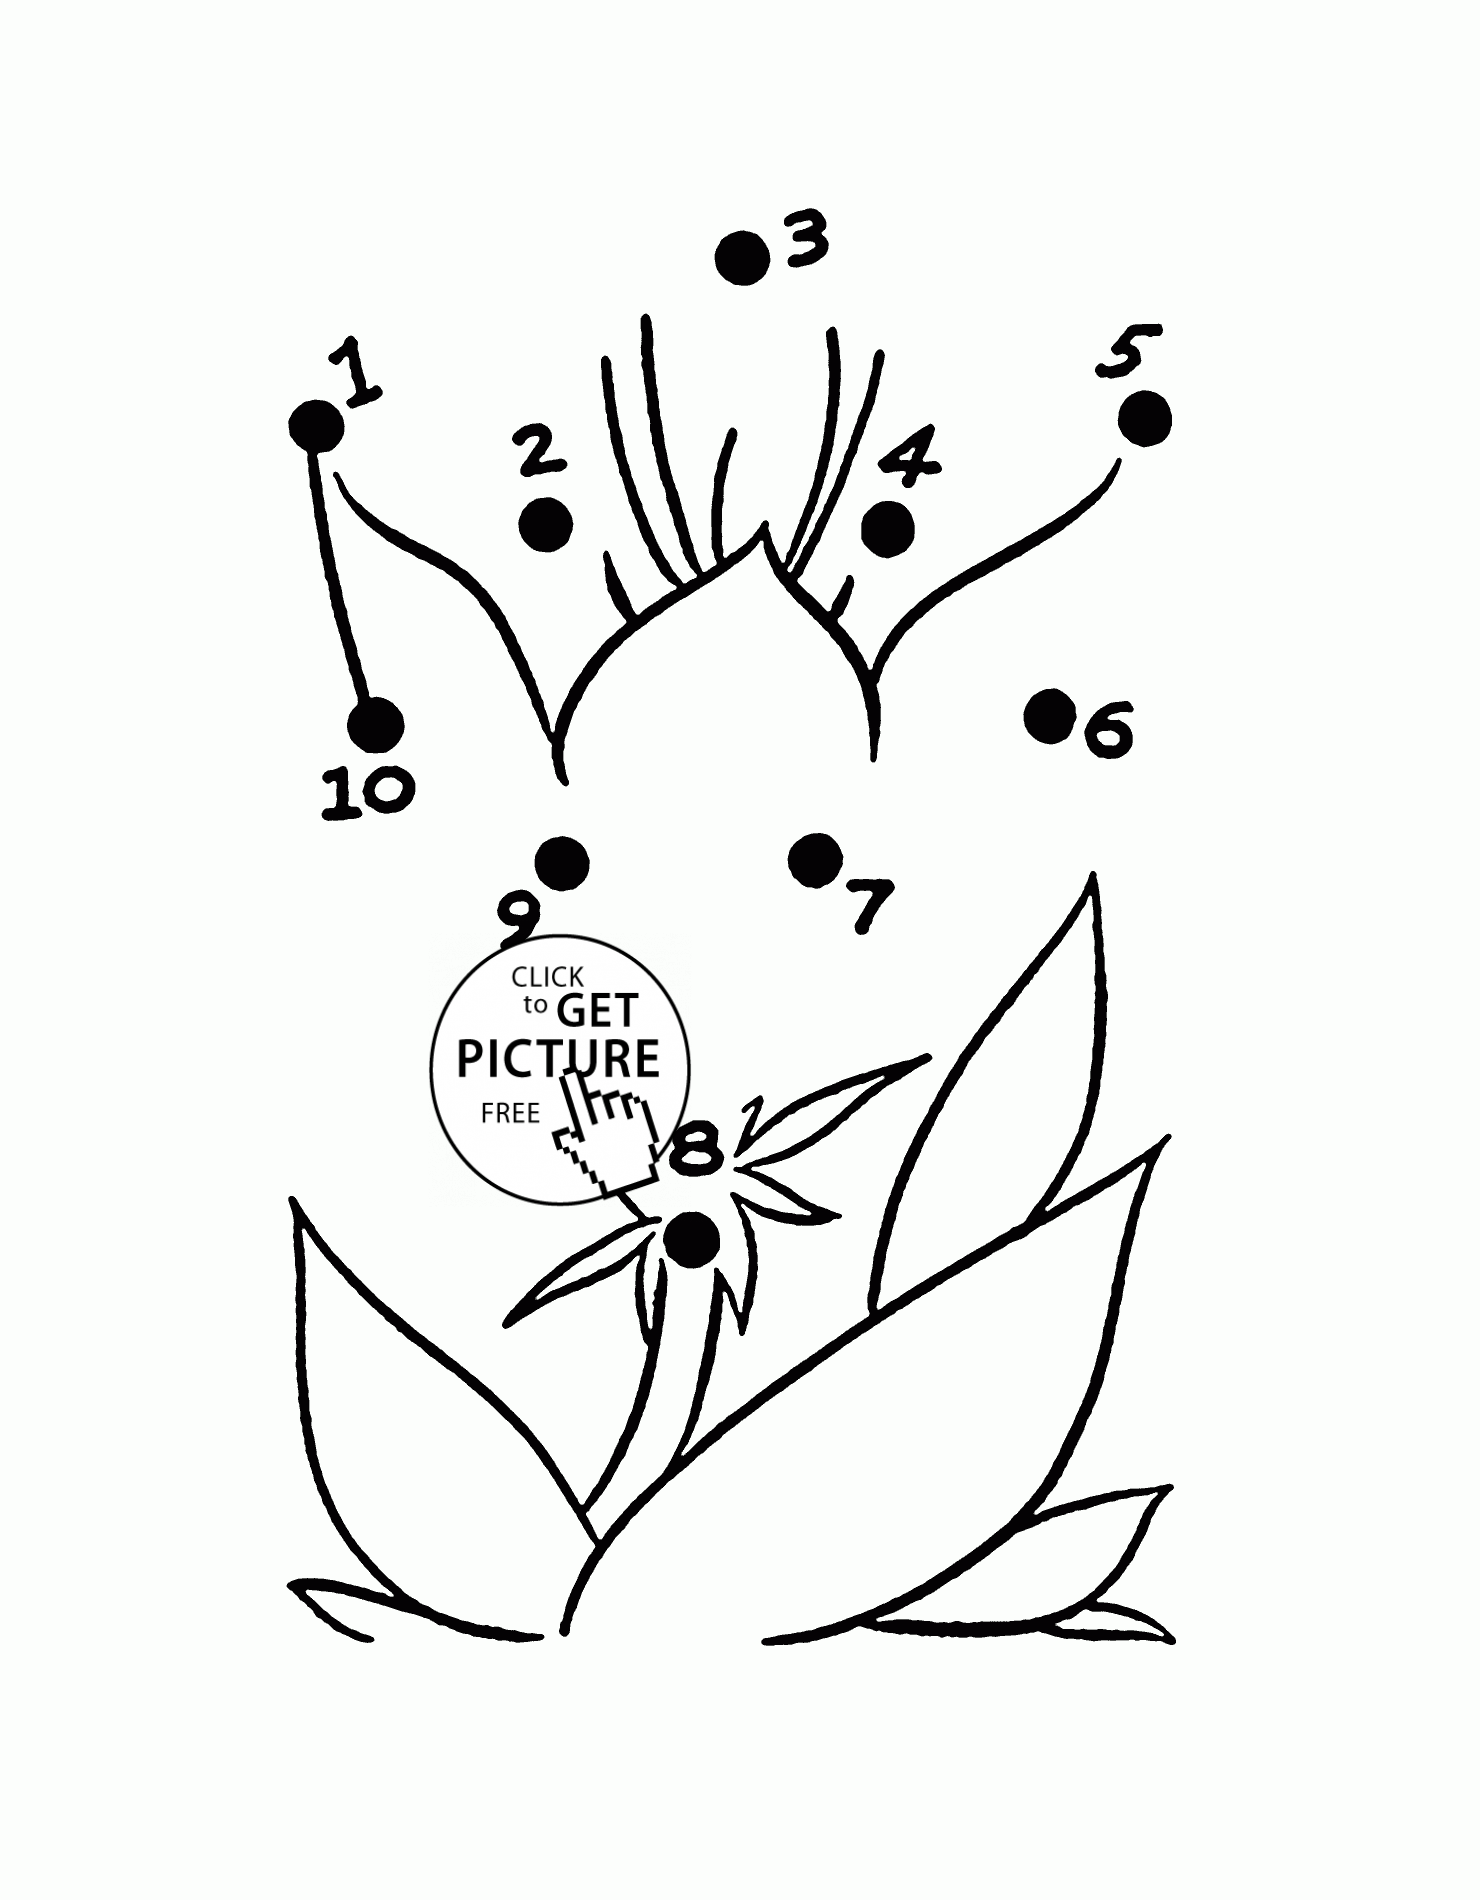 soulmetalpodcast-simple-dot-coloring-pages